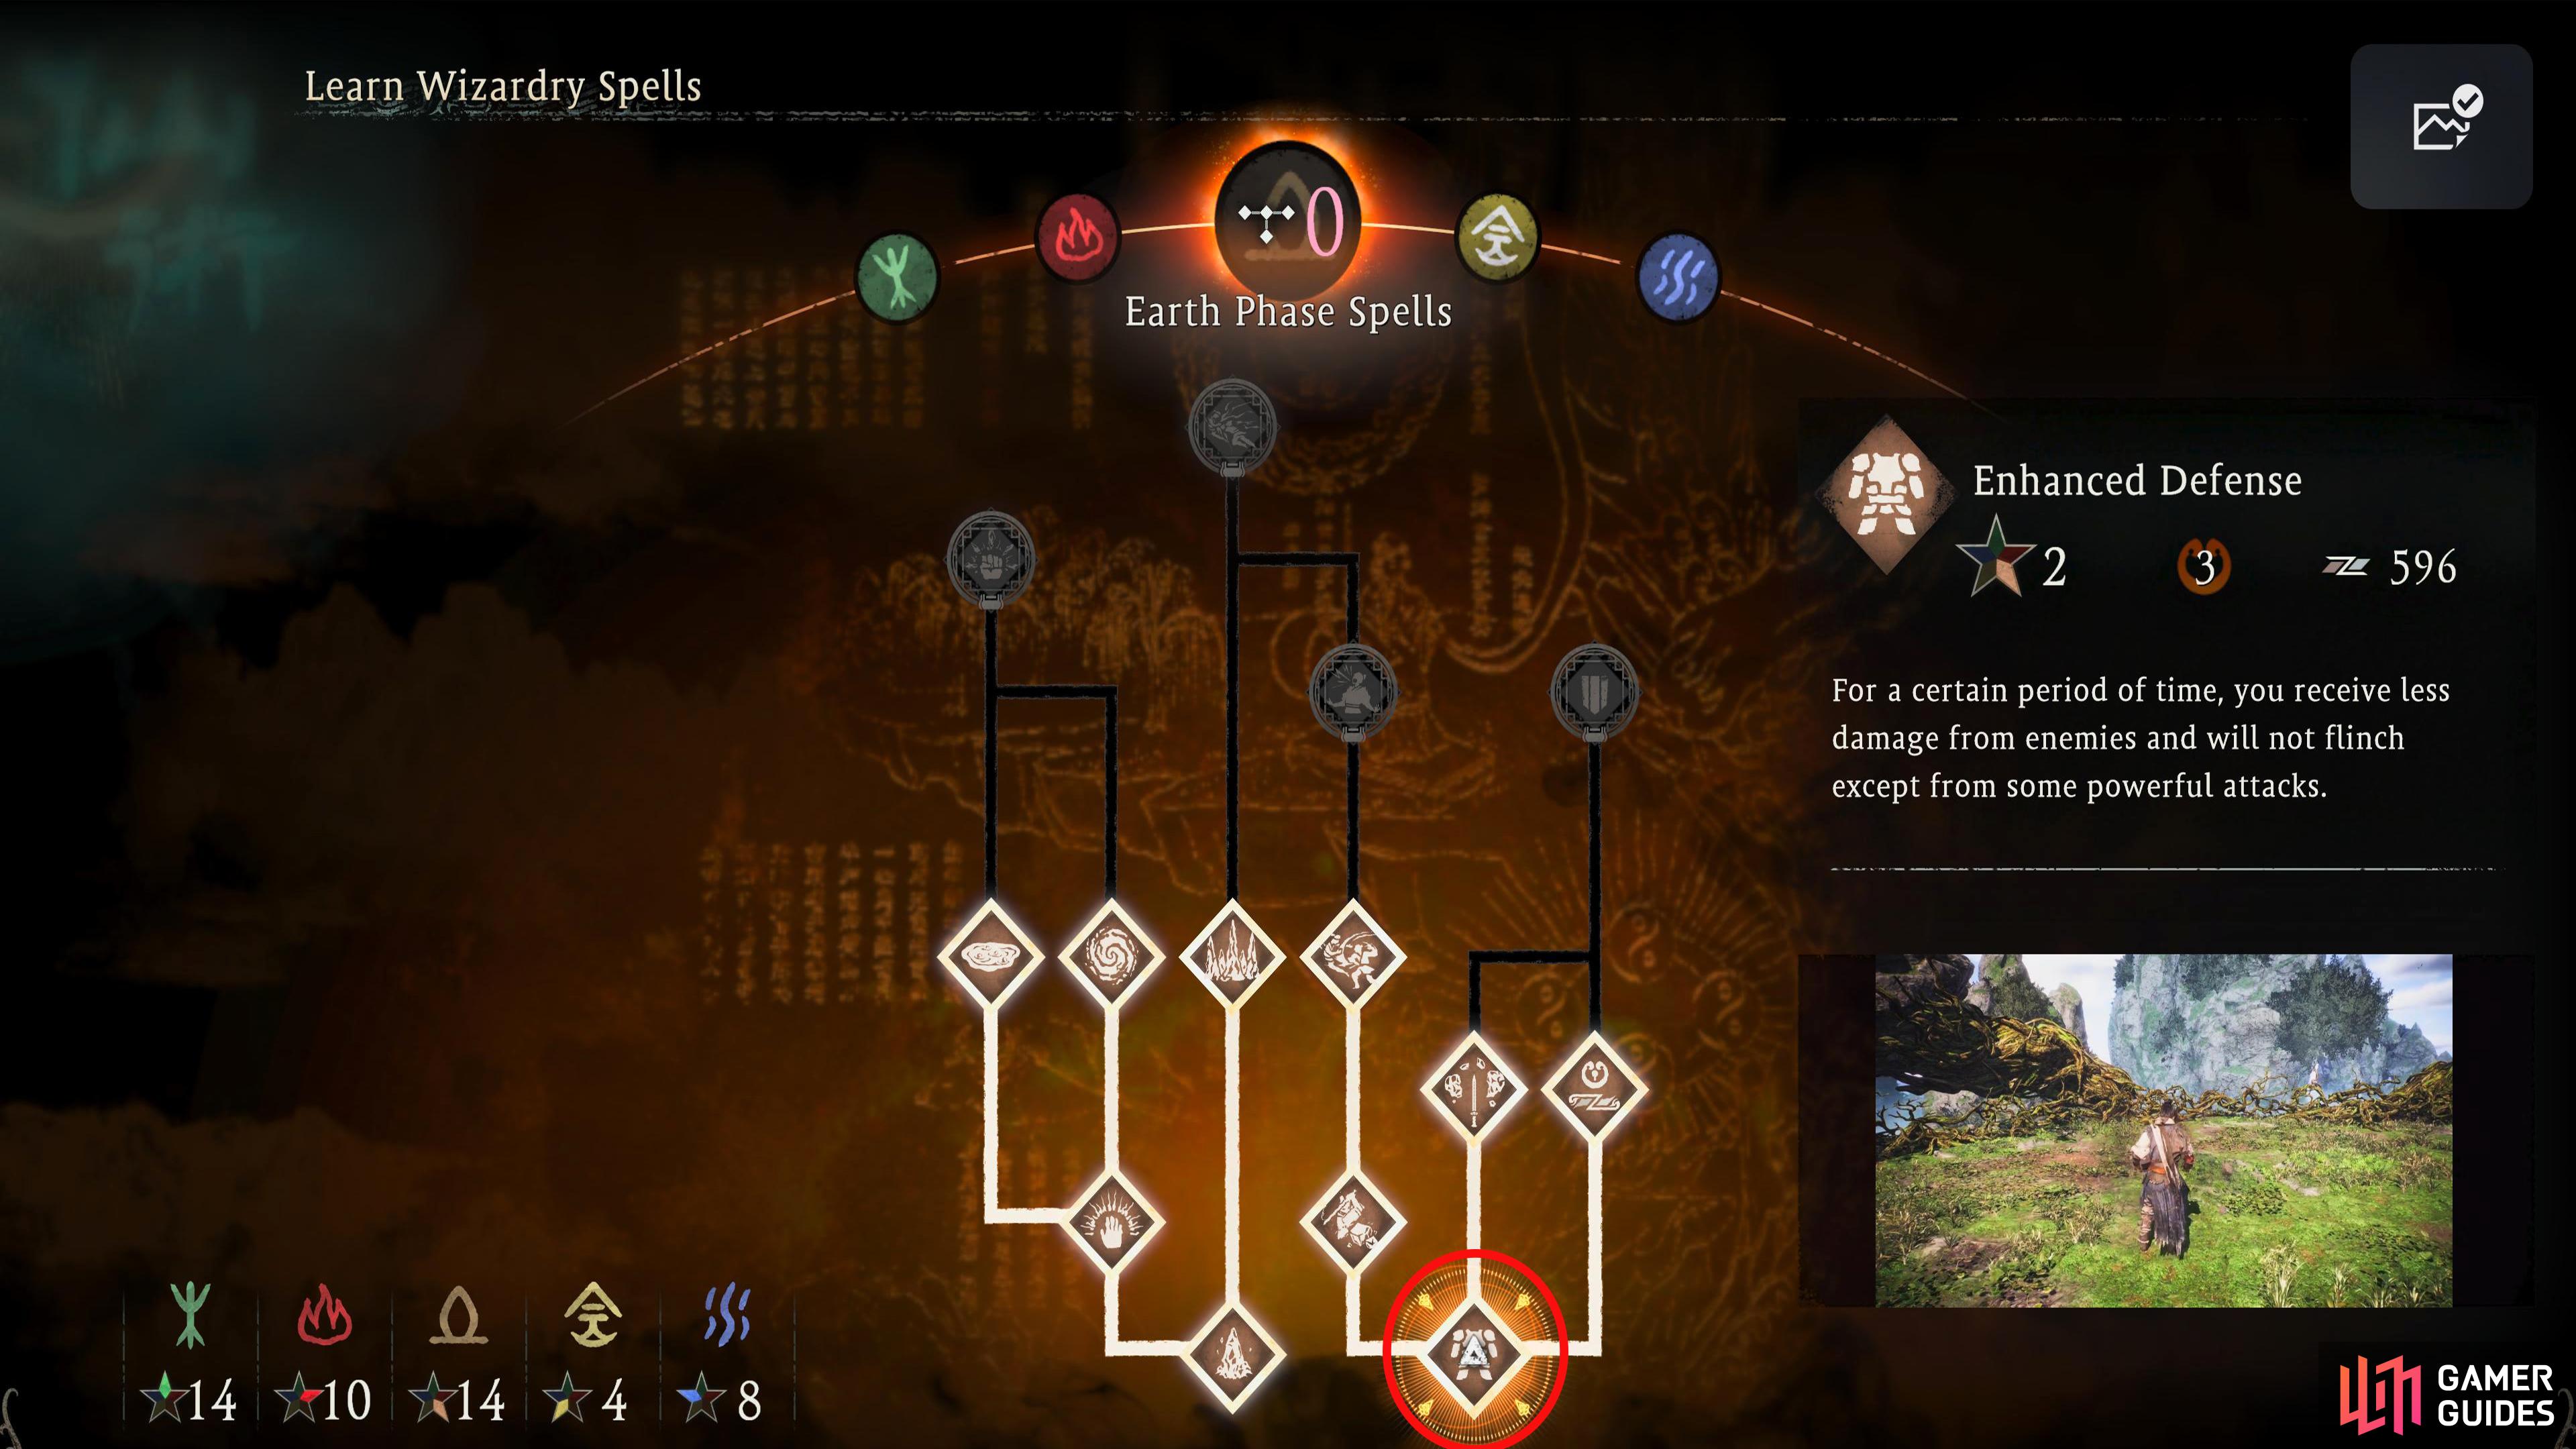 Enhanced Defense can be found on the right of the Earth Phase tree.